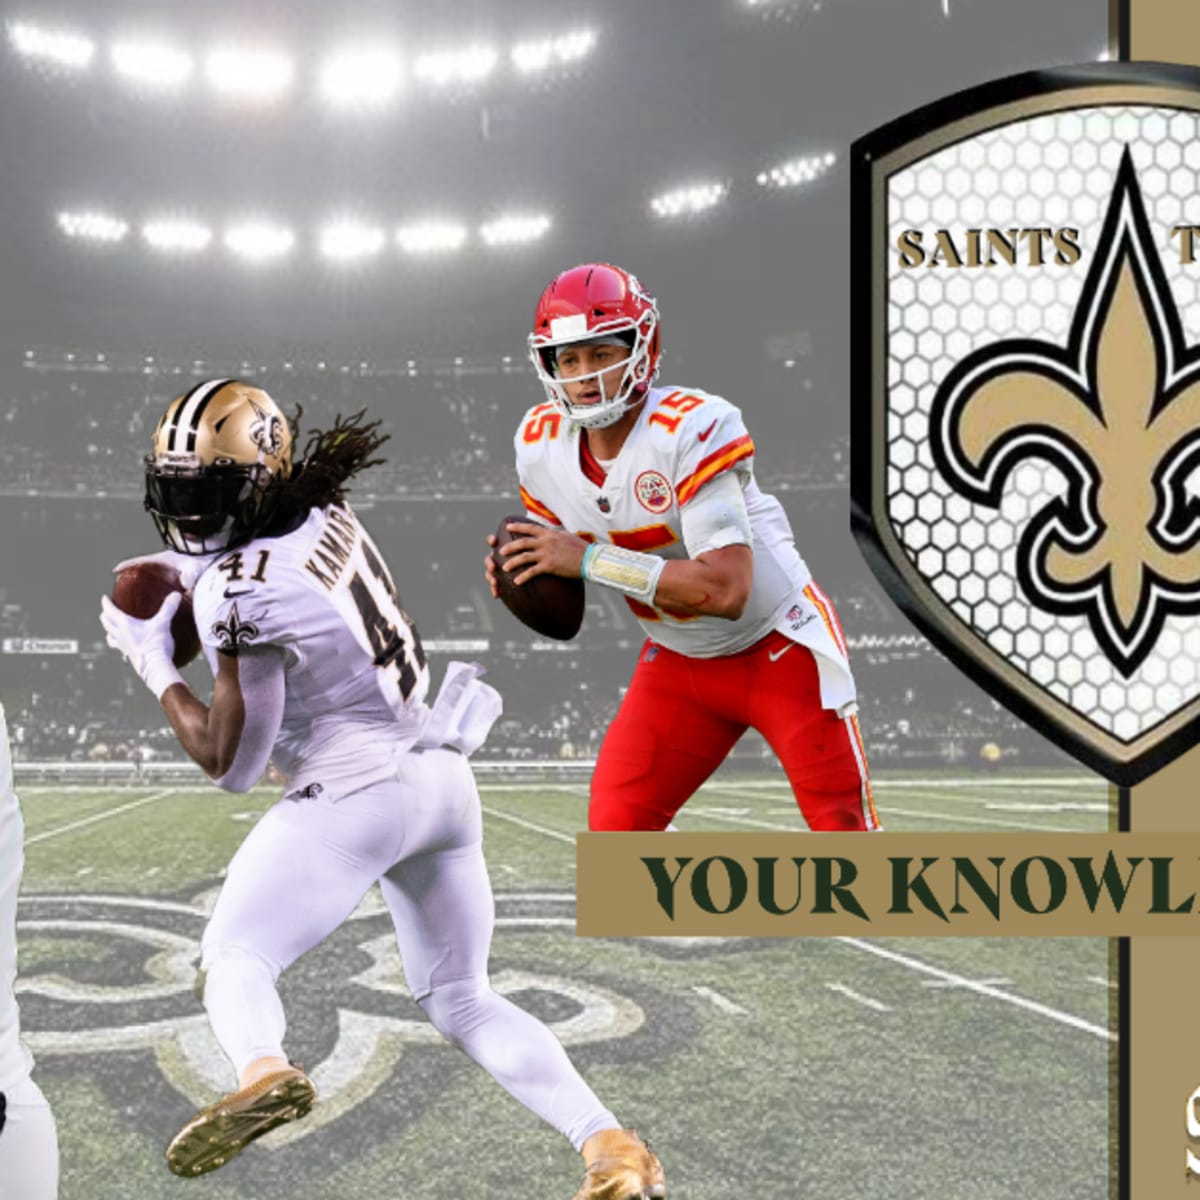 Saints can have 3,000 fans for Sunday's game with more to come